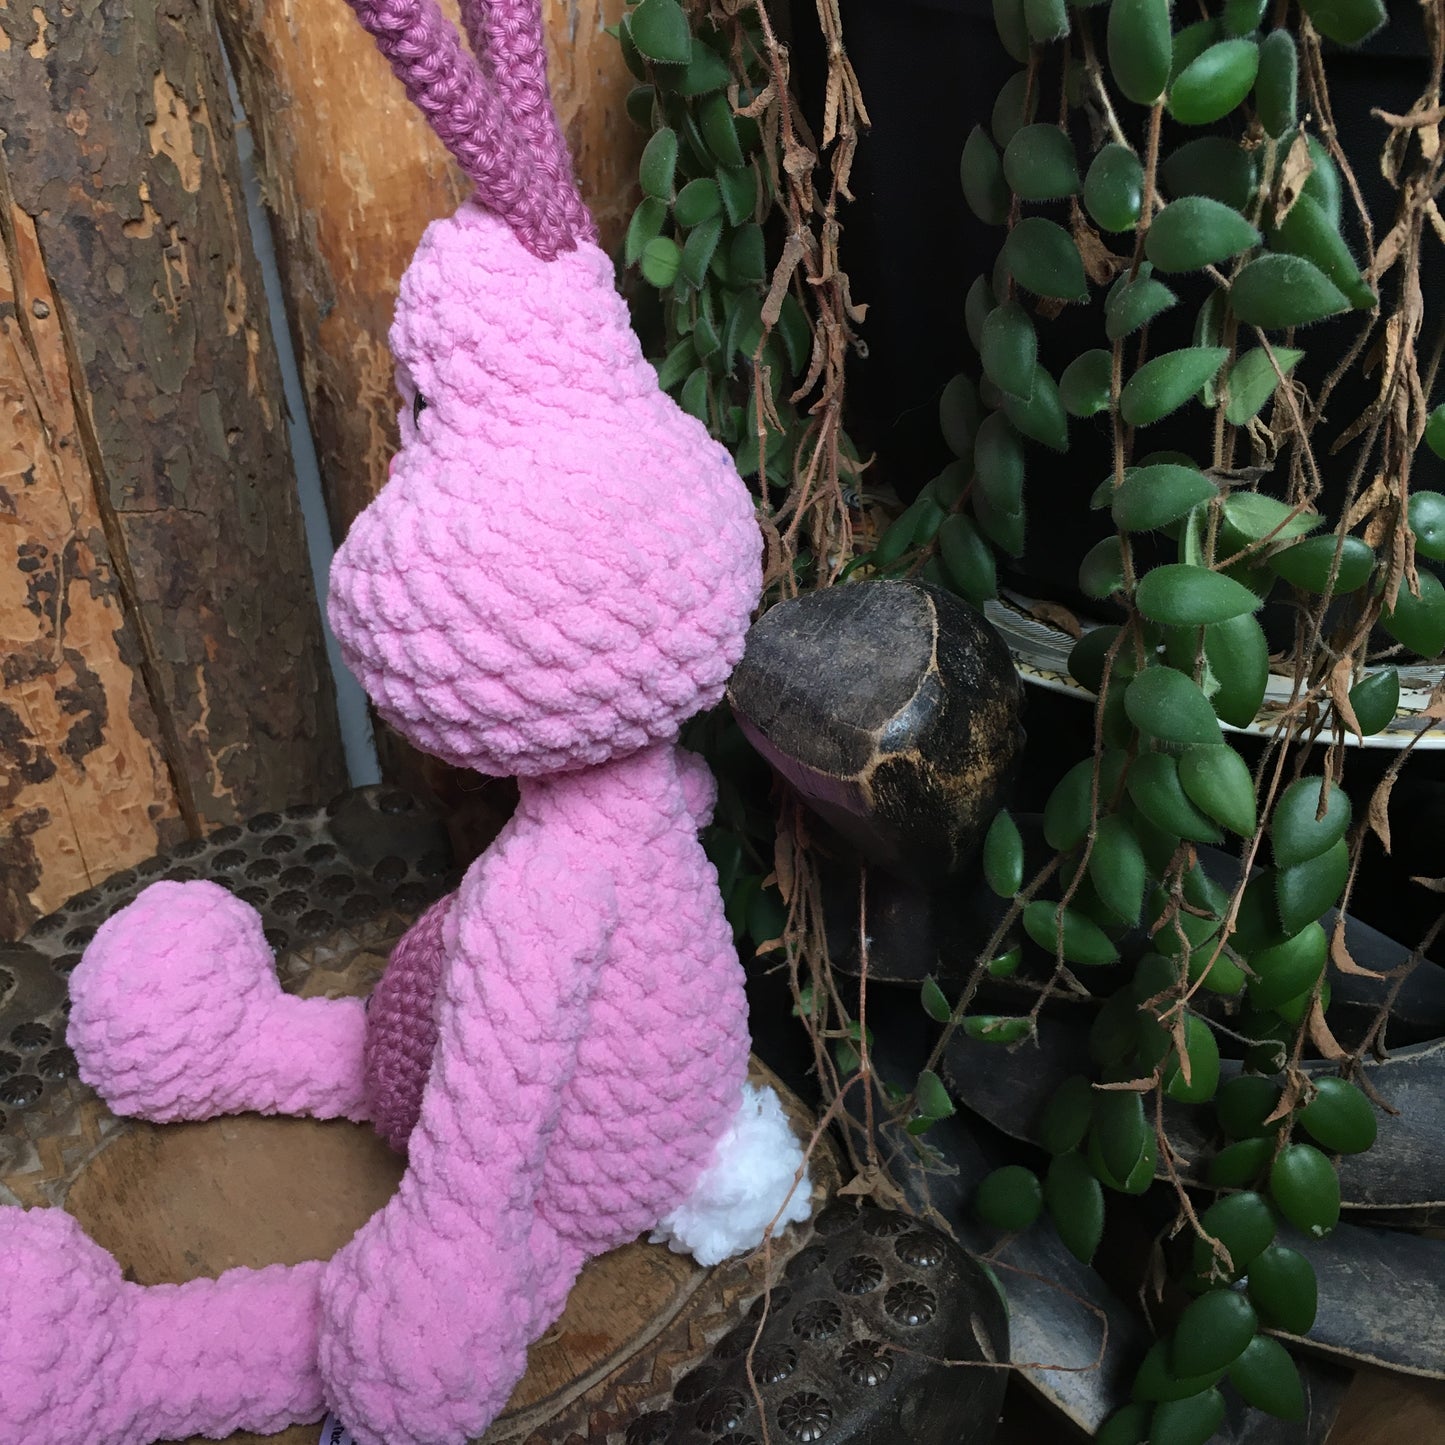 *Perlin Pinpin The Rabbit Squeeze-It - Pink